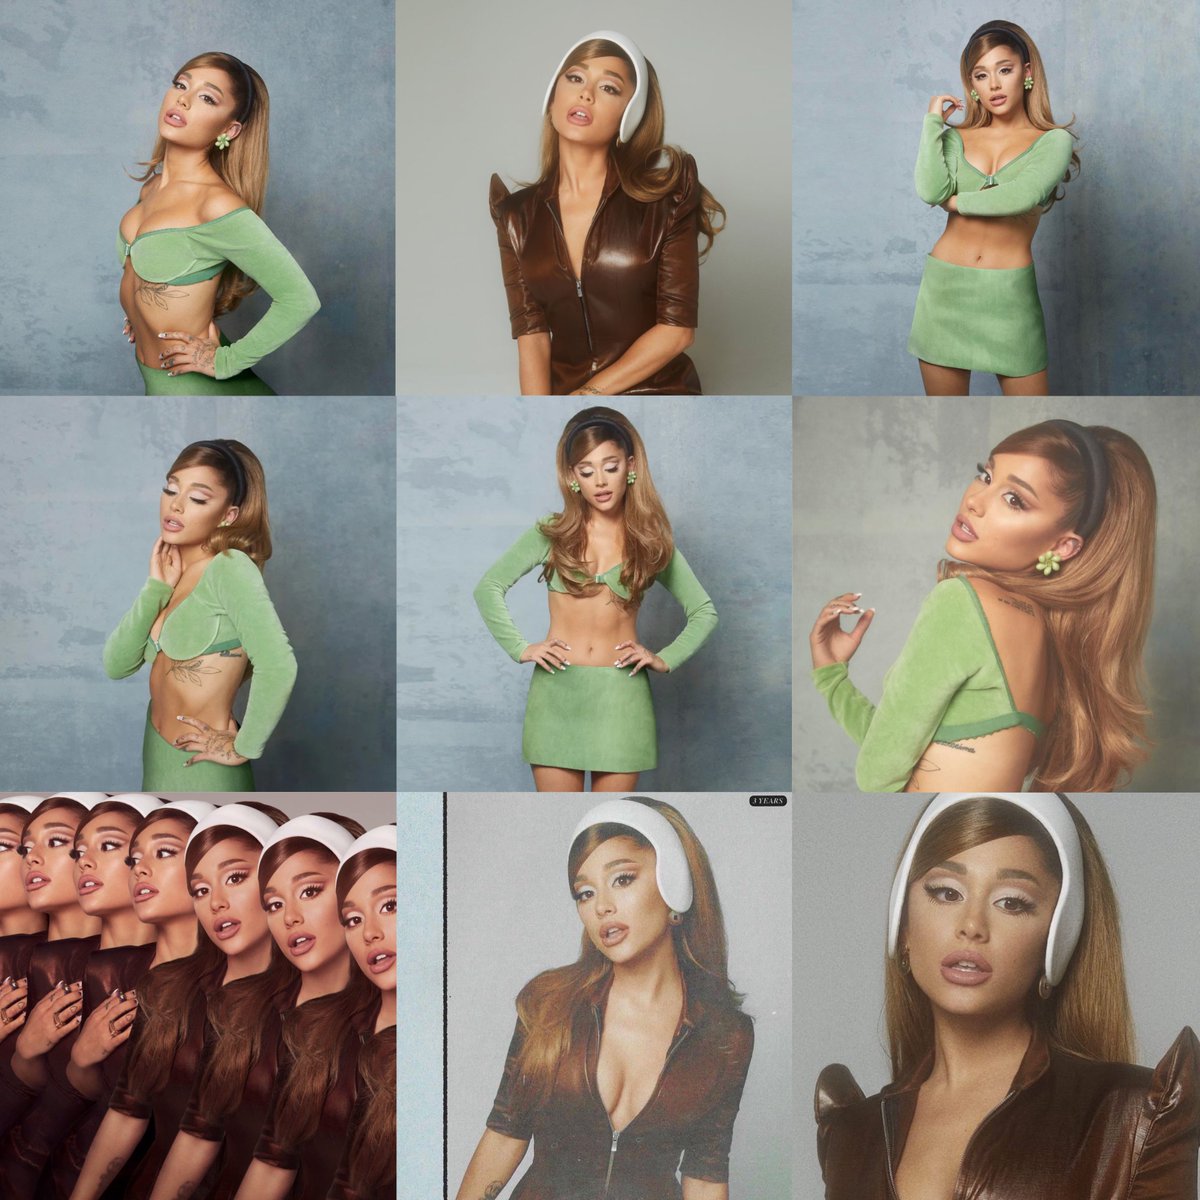 ariana grande’s photoshoot for positions. i’m never moving on.